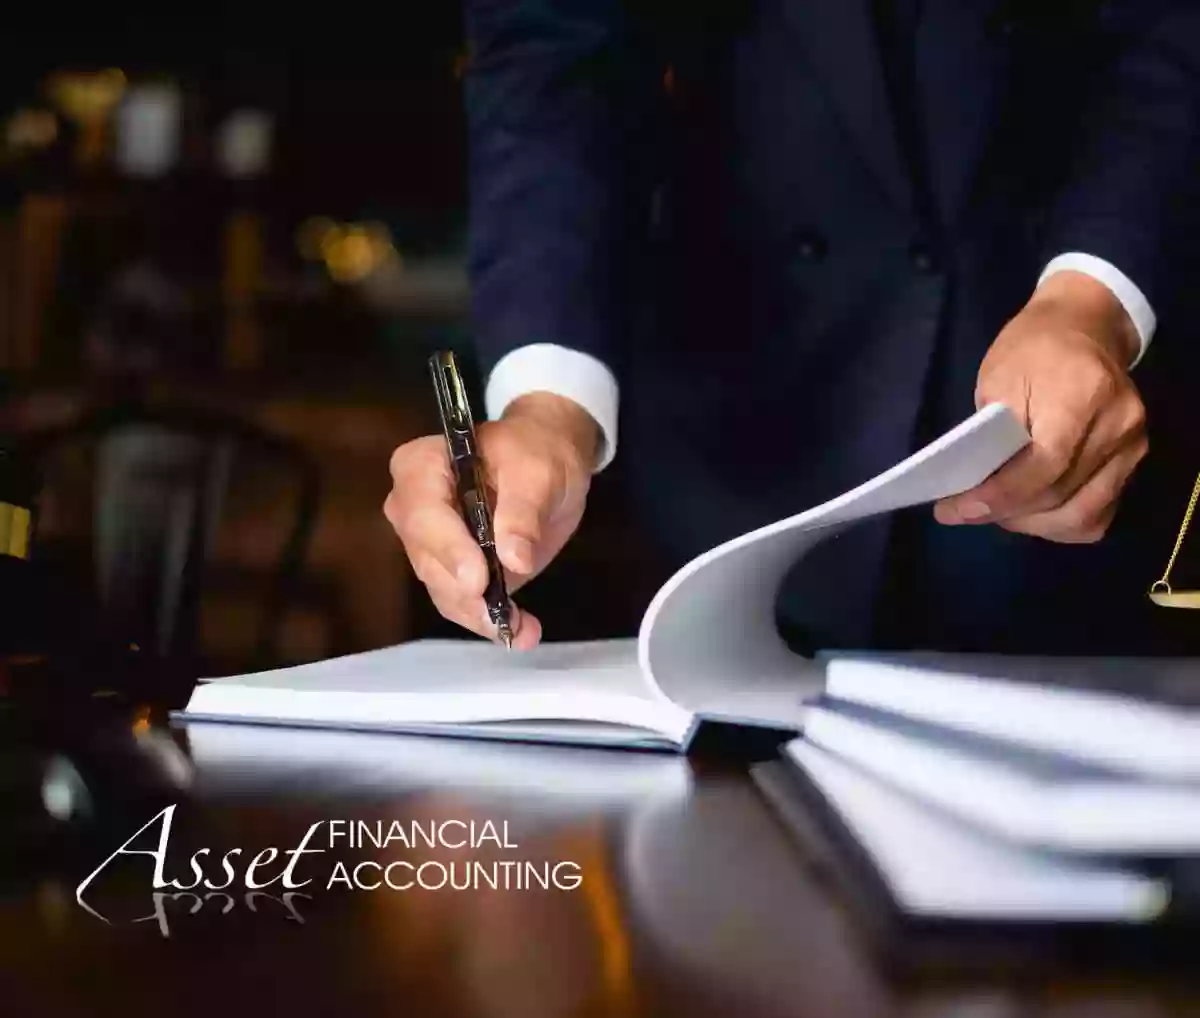 Asset Financial Accounting